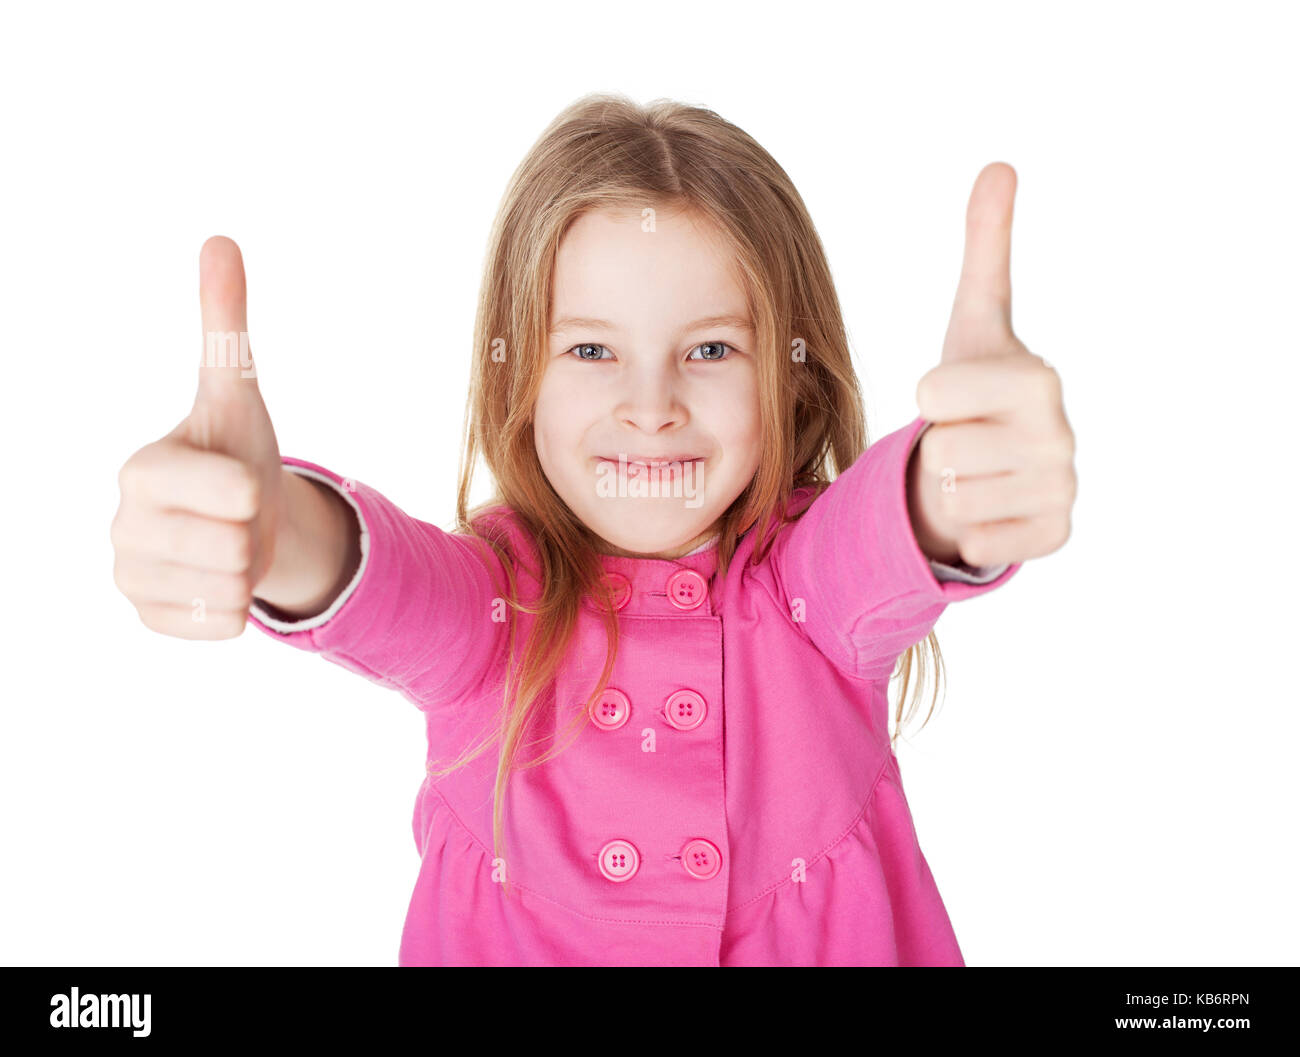 Cute little girl in red shirt showing Thumbs up isolé sur fond blanc Banque D'Images